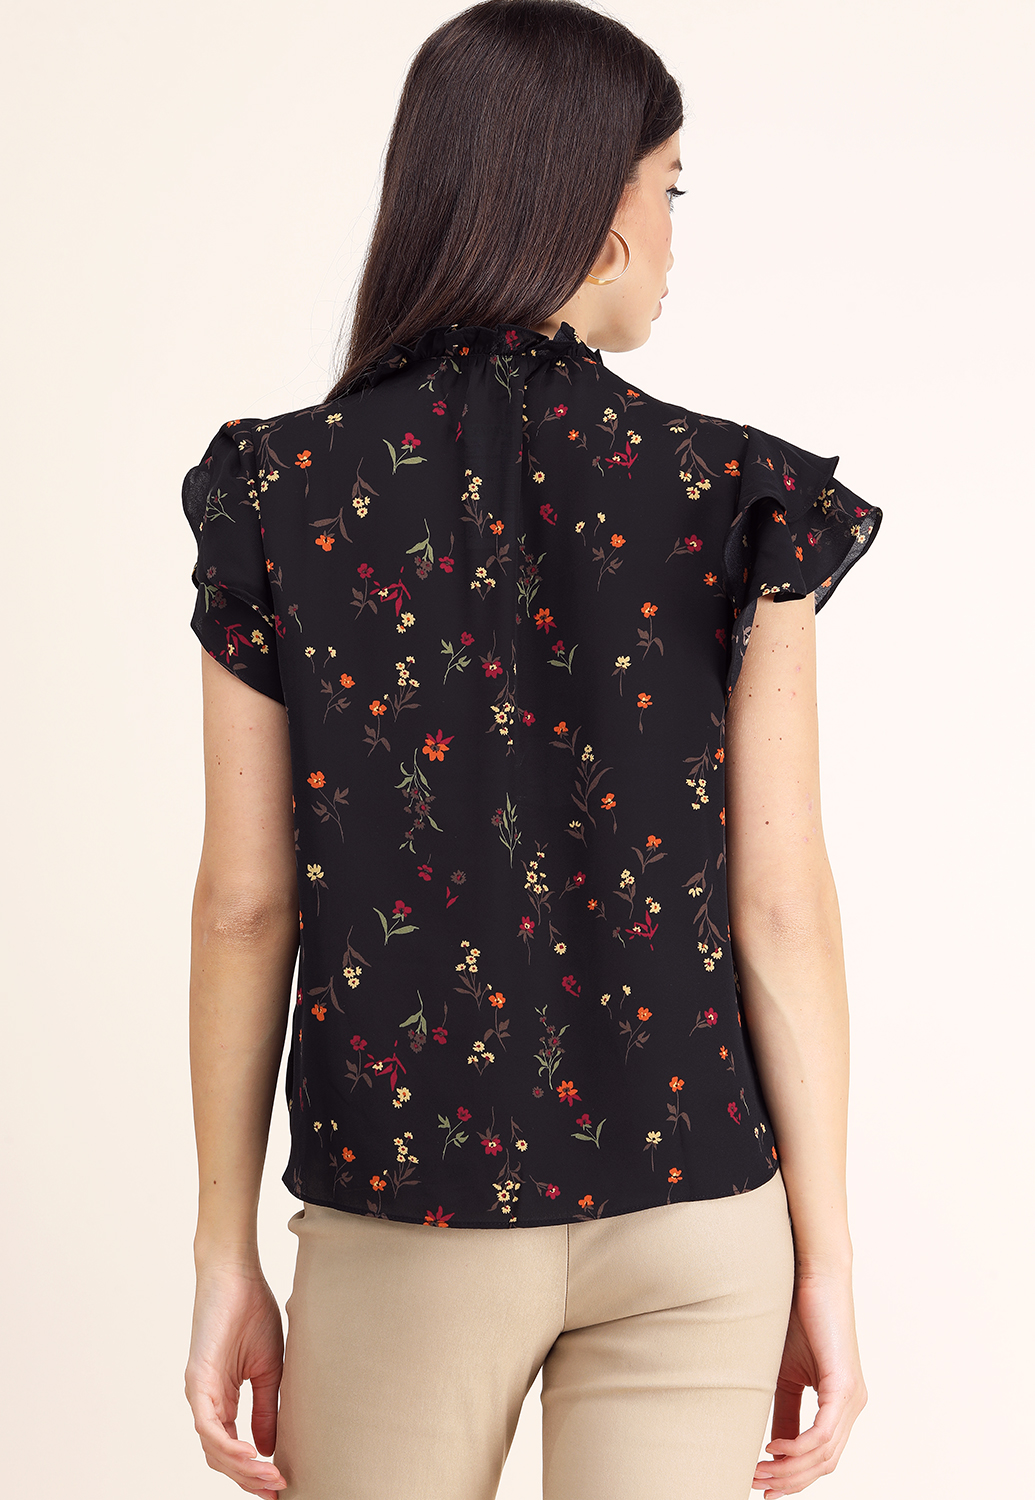 Ruffle Detail Floral Top